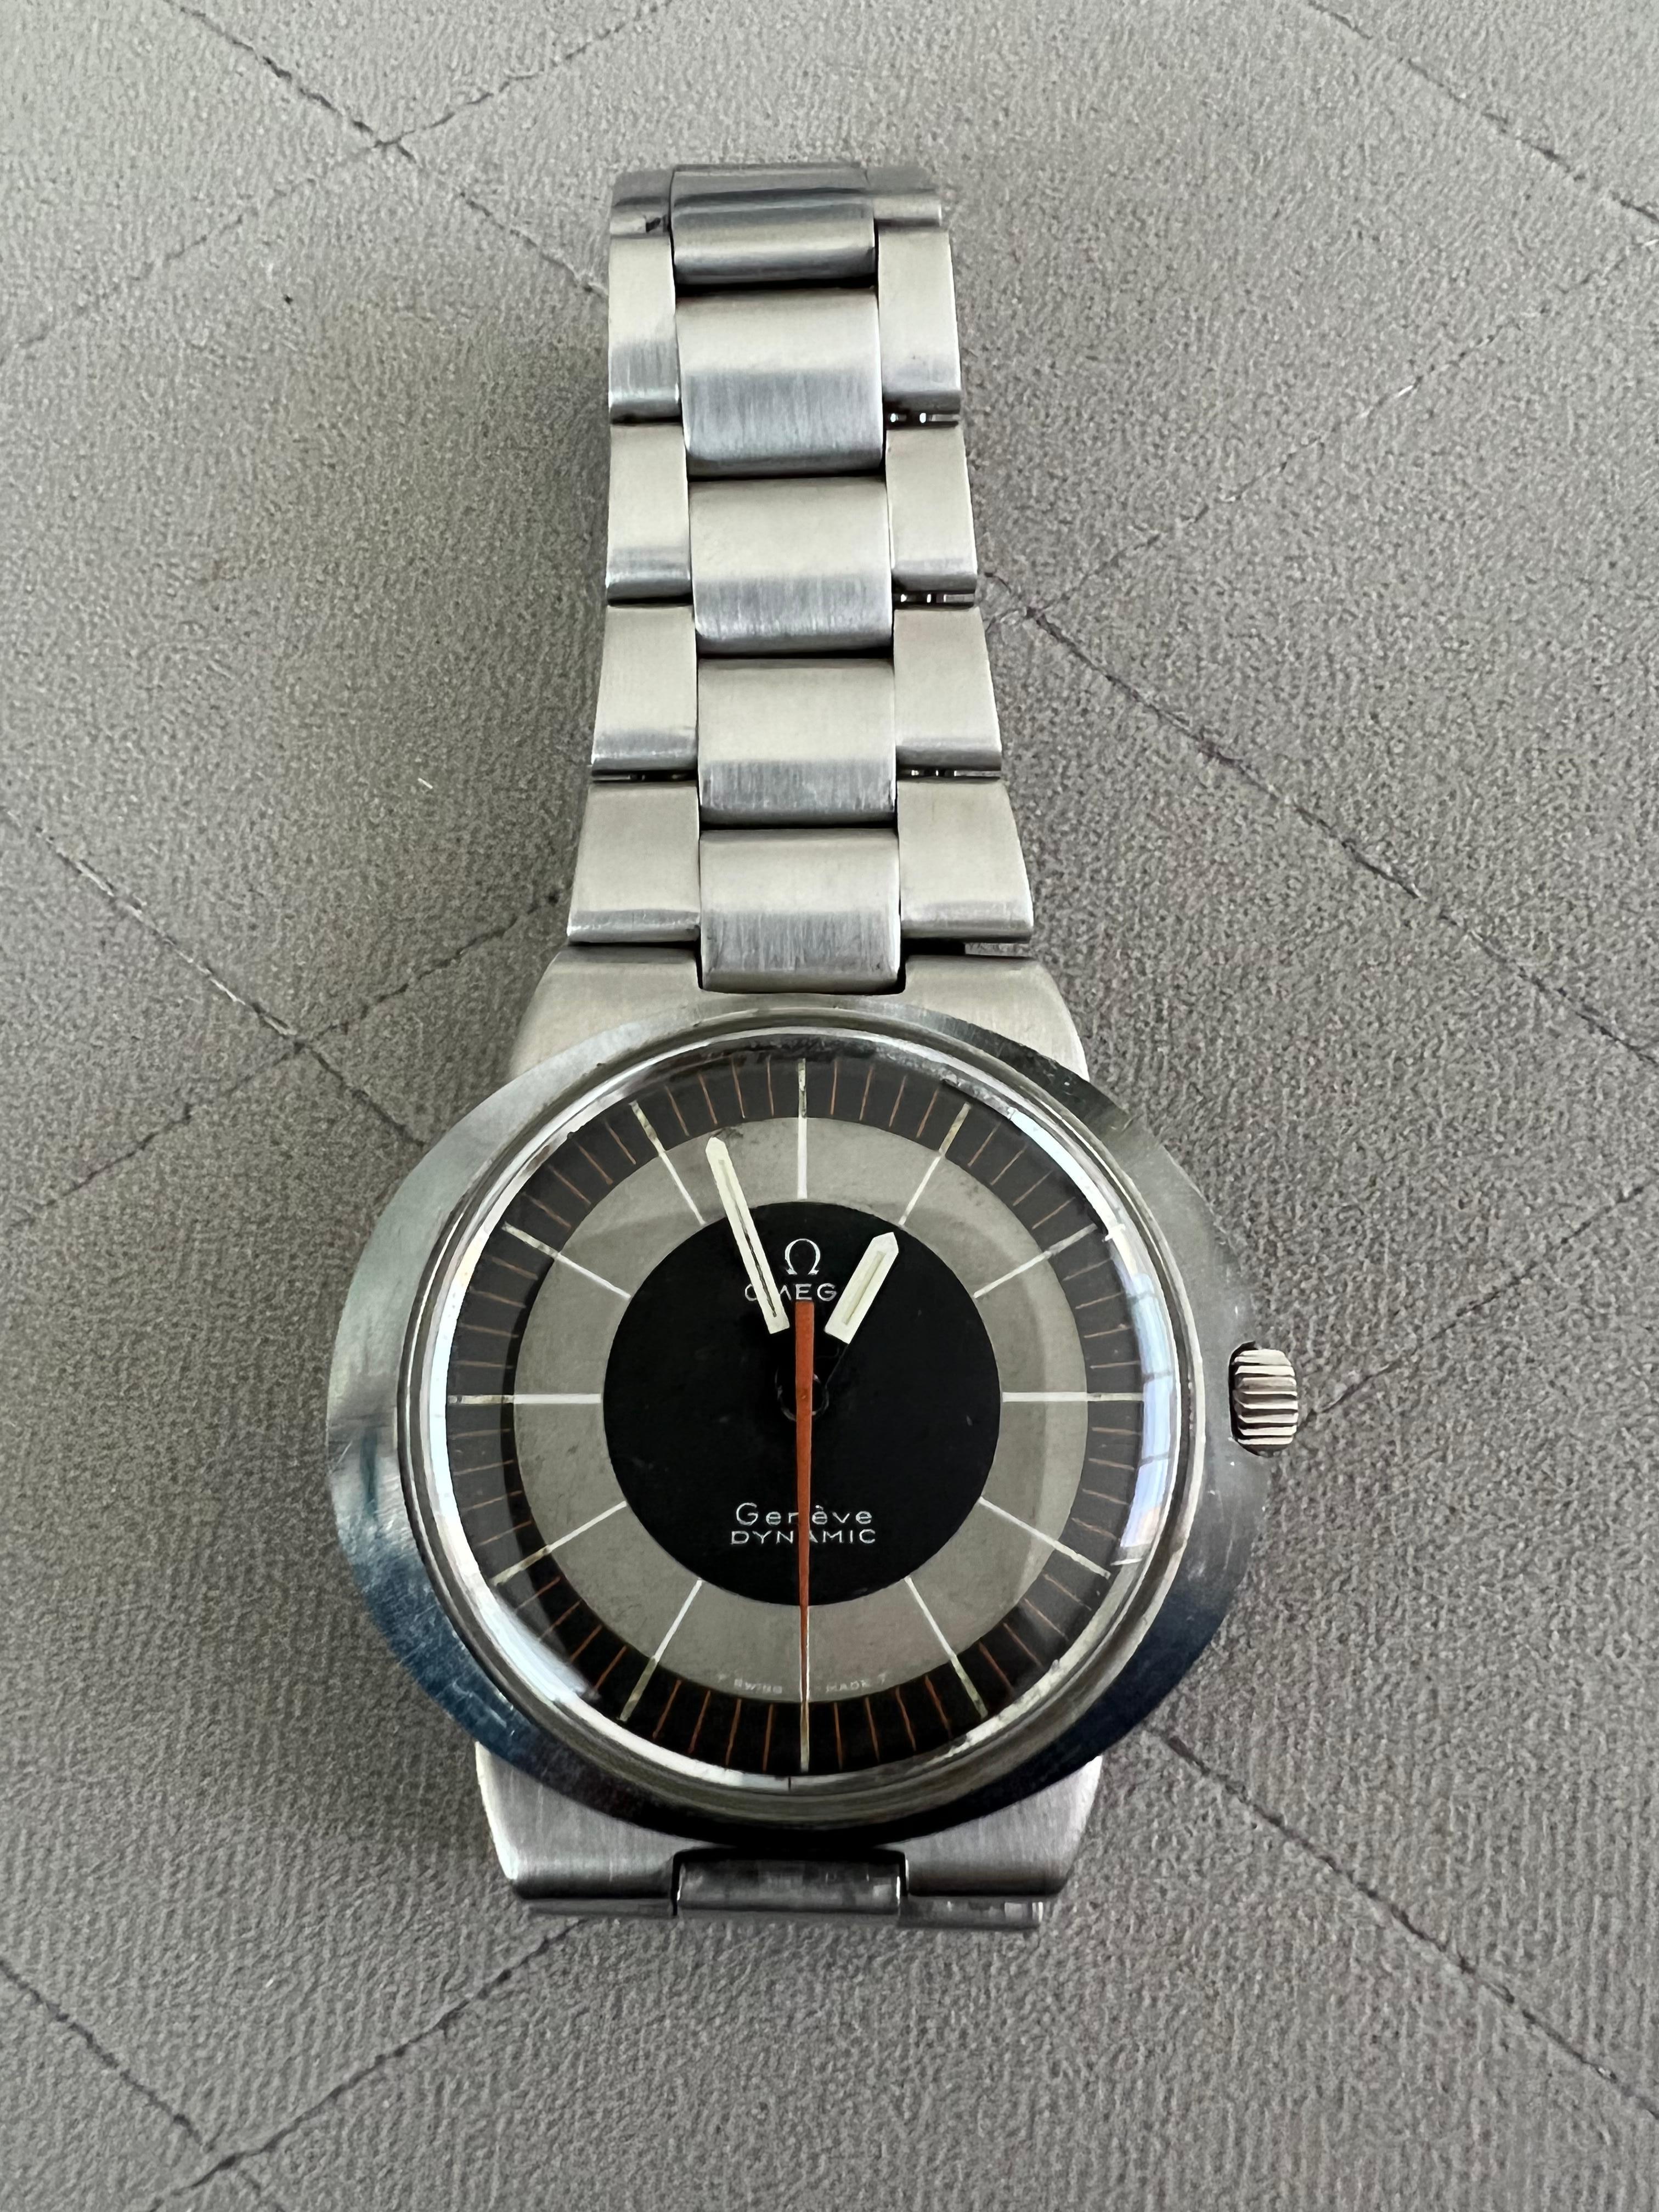 Omega Dynamic Vintage c. 1970s Watch W/ Tricolored Dial 1